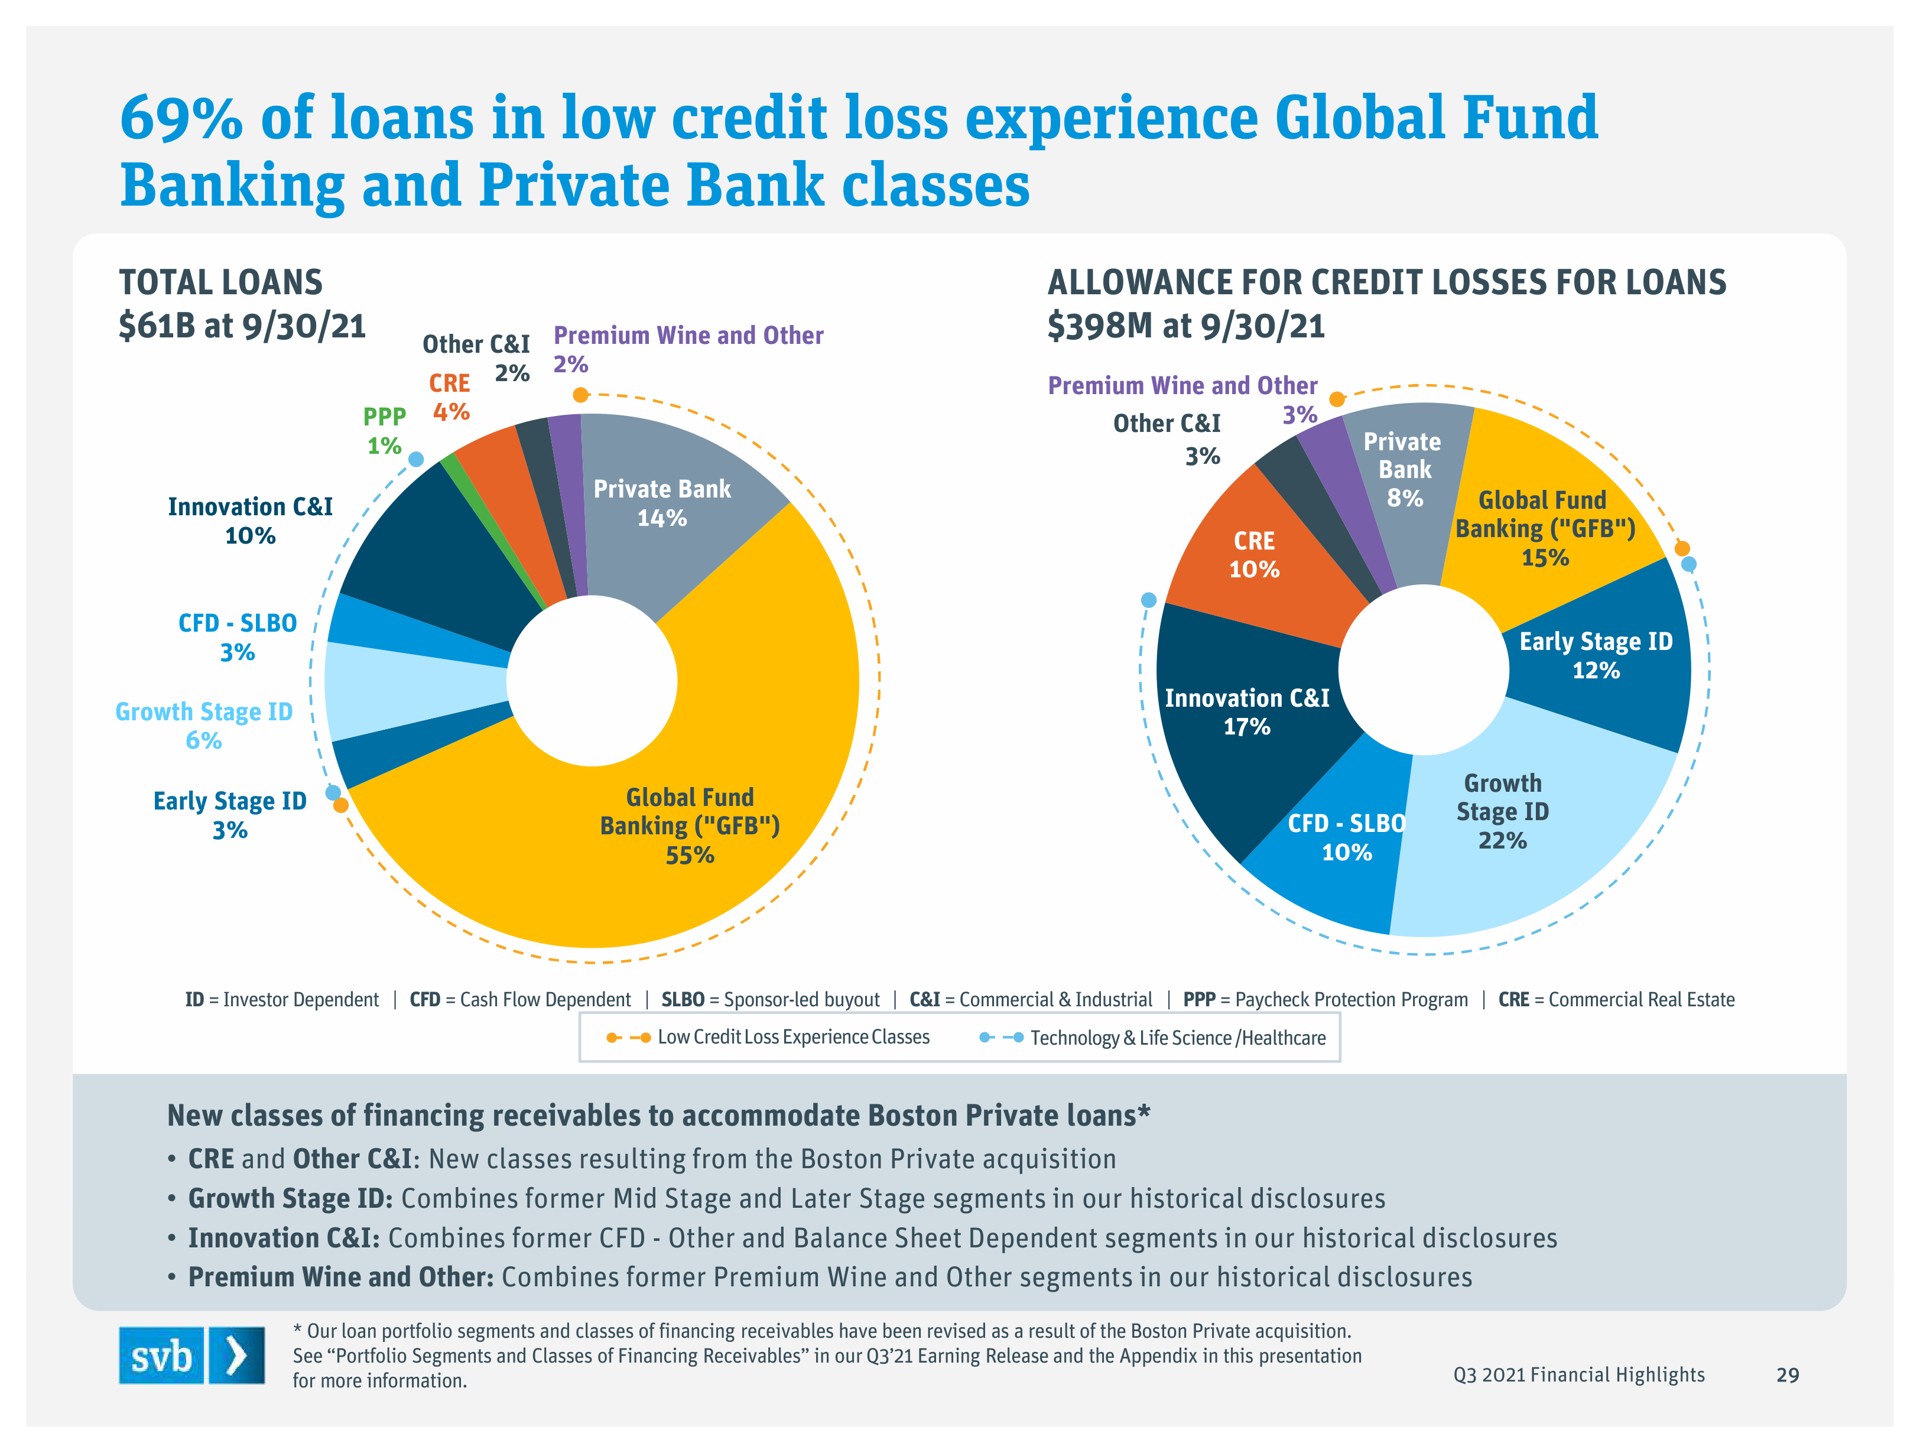 of loans in low credit loss experience global fund banking and private bank classes | Silicon Valley Bank